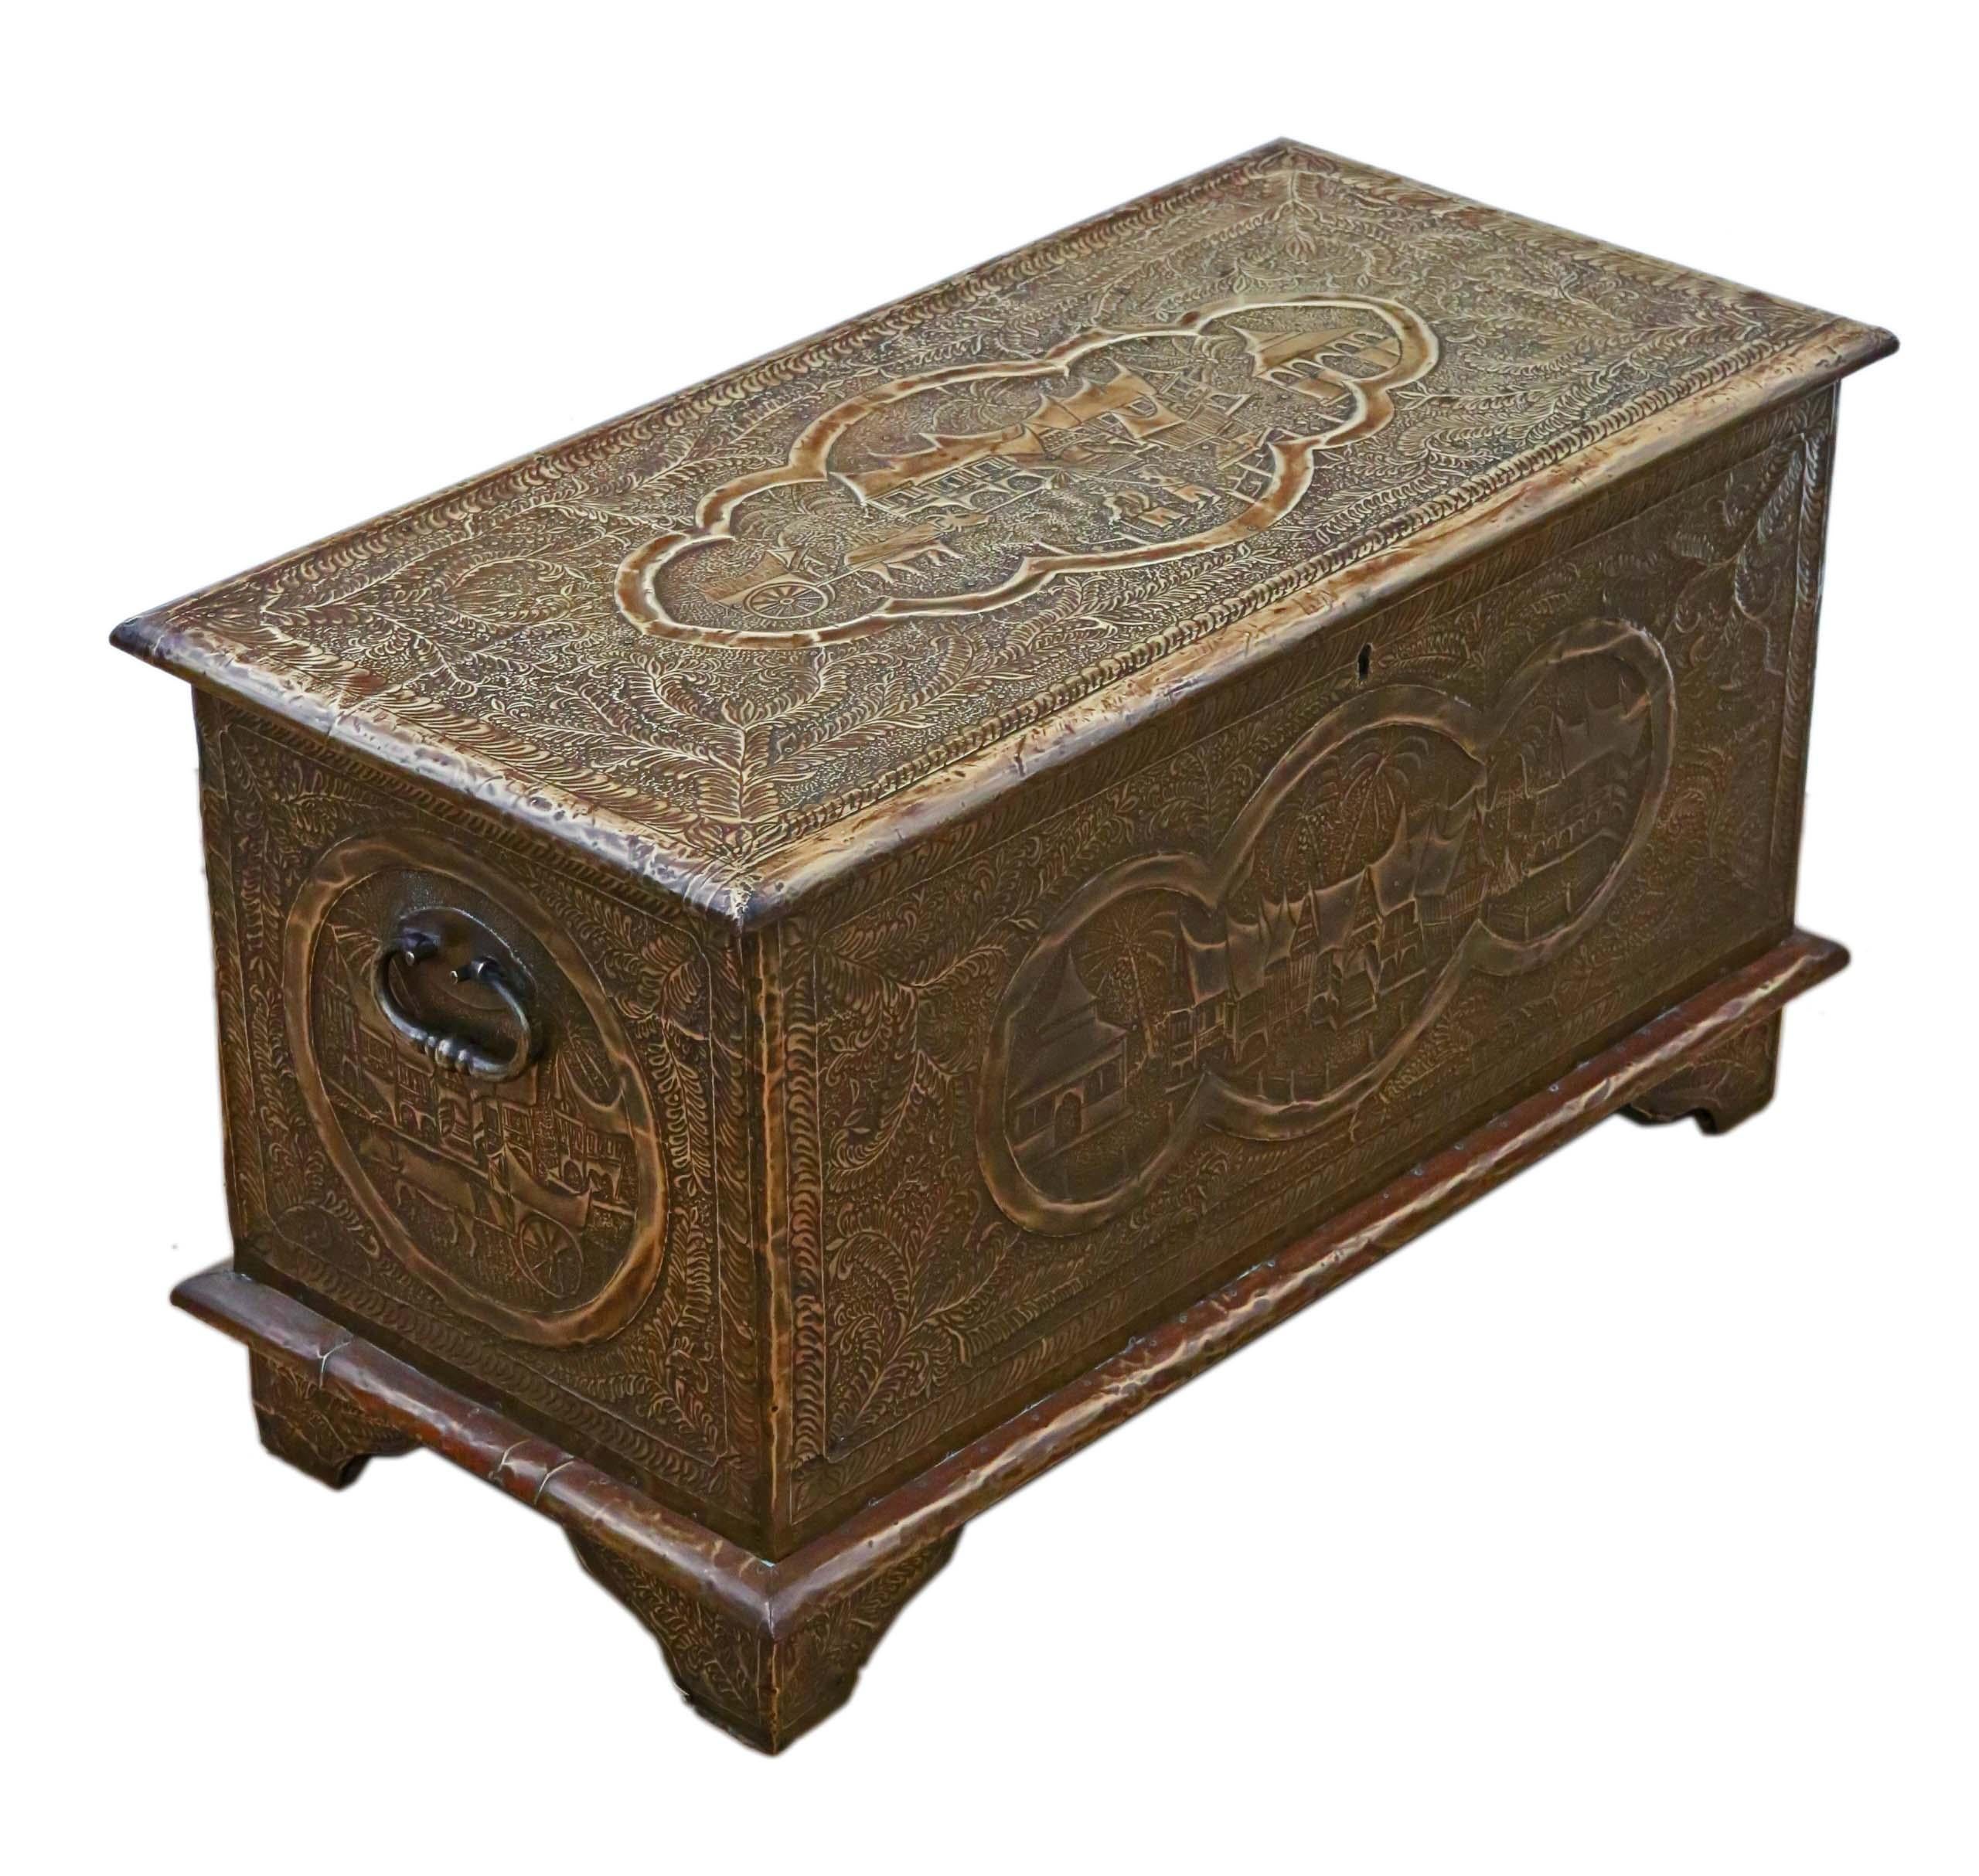 Antique Fine Quality Chinoiserie Chinese Brass Covered Camphor Wood Chest Coffer In Good Condition For Sale In Wisbech, Cambridgeshire